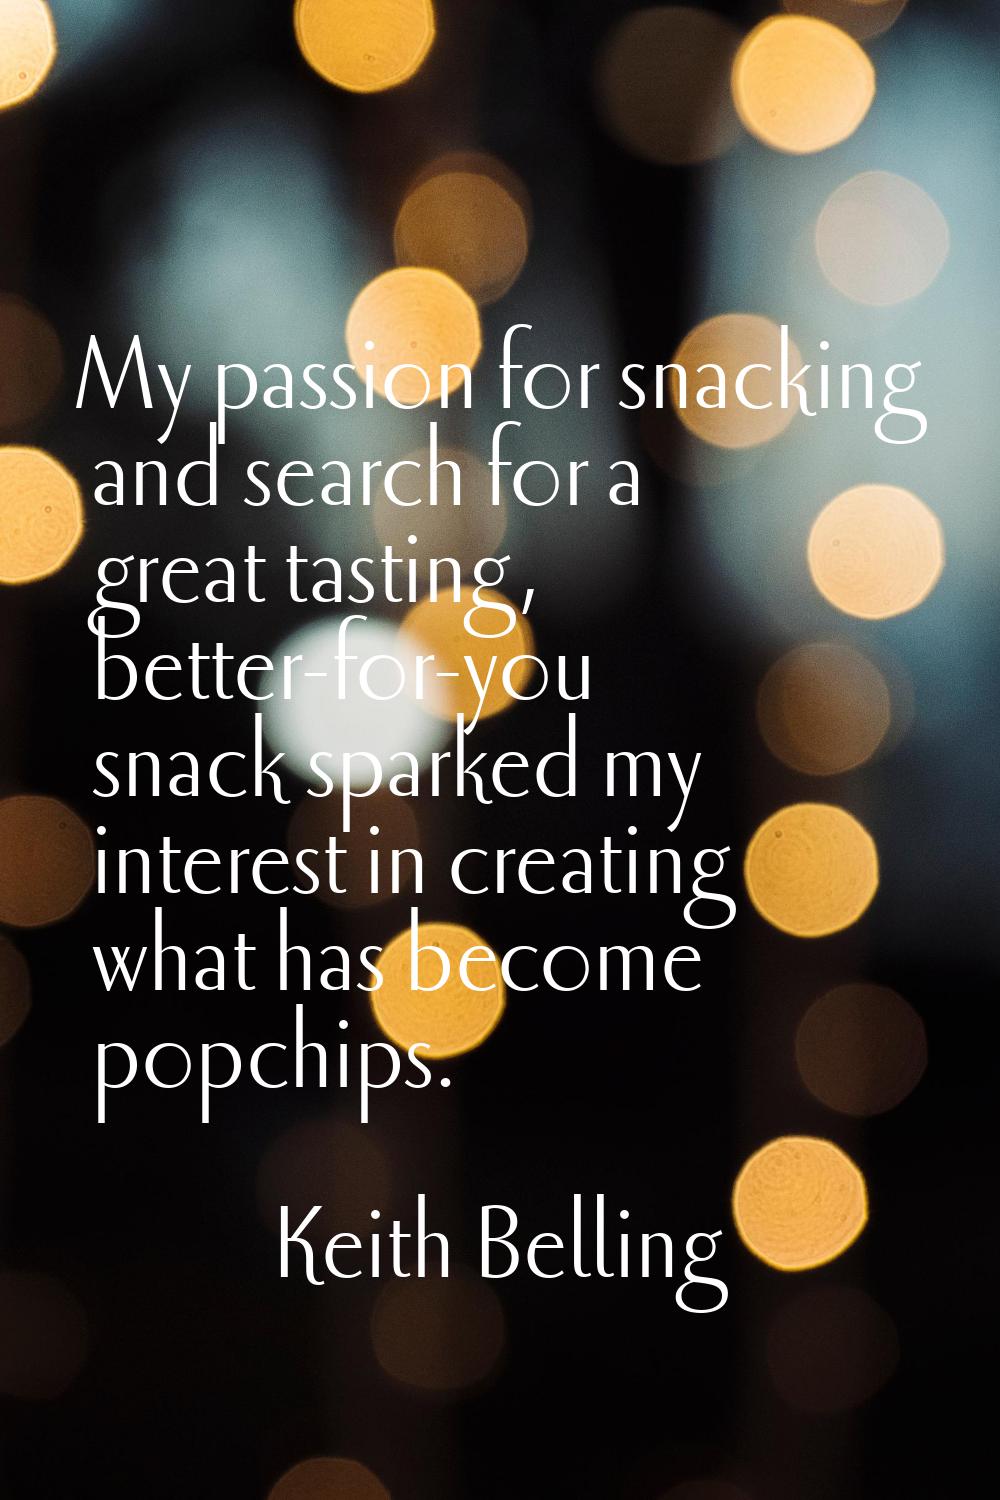 My passion for snacking and search for a great tasting, better-for-you snack sparked my interest in